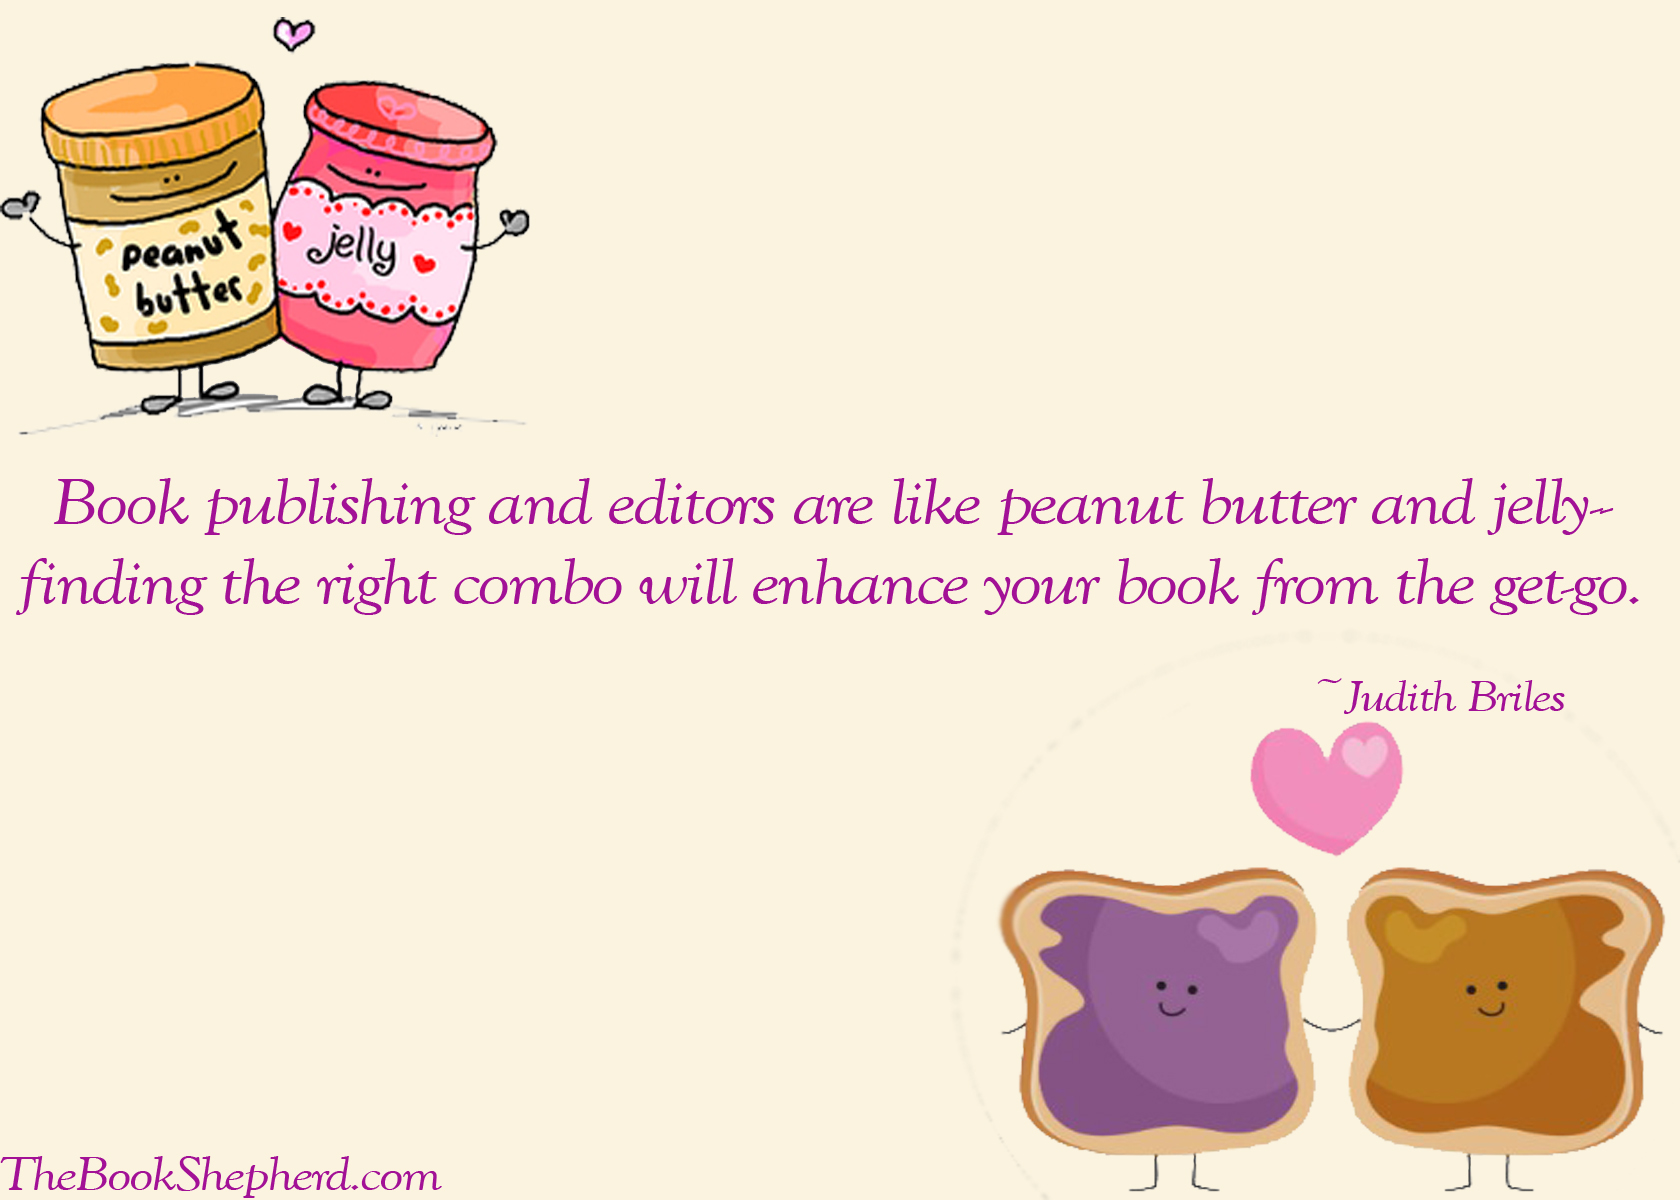 Book Publishing and Editors Are Like Peanut Butter and Jelly